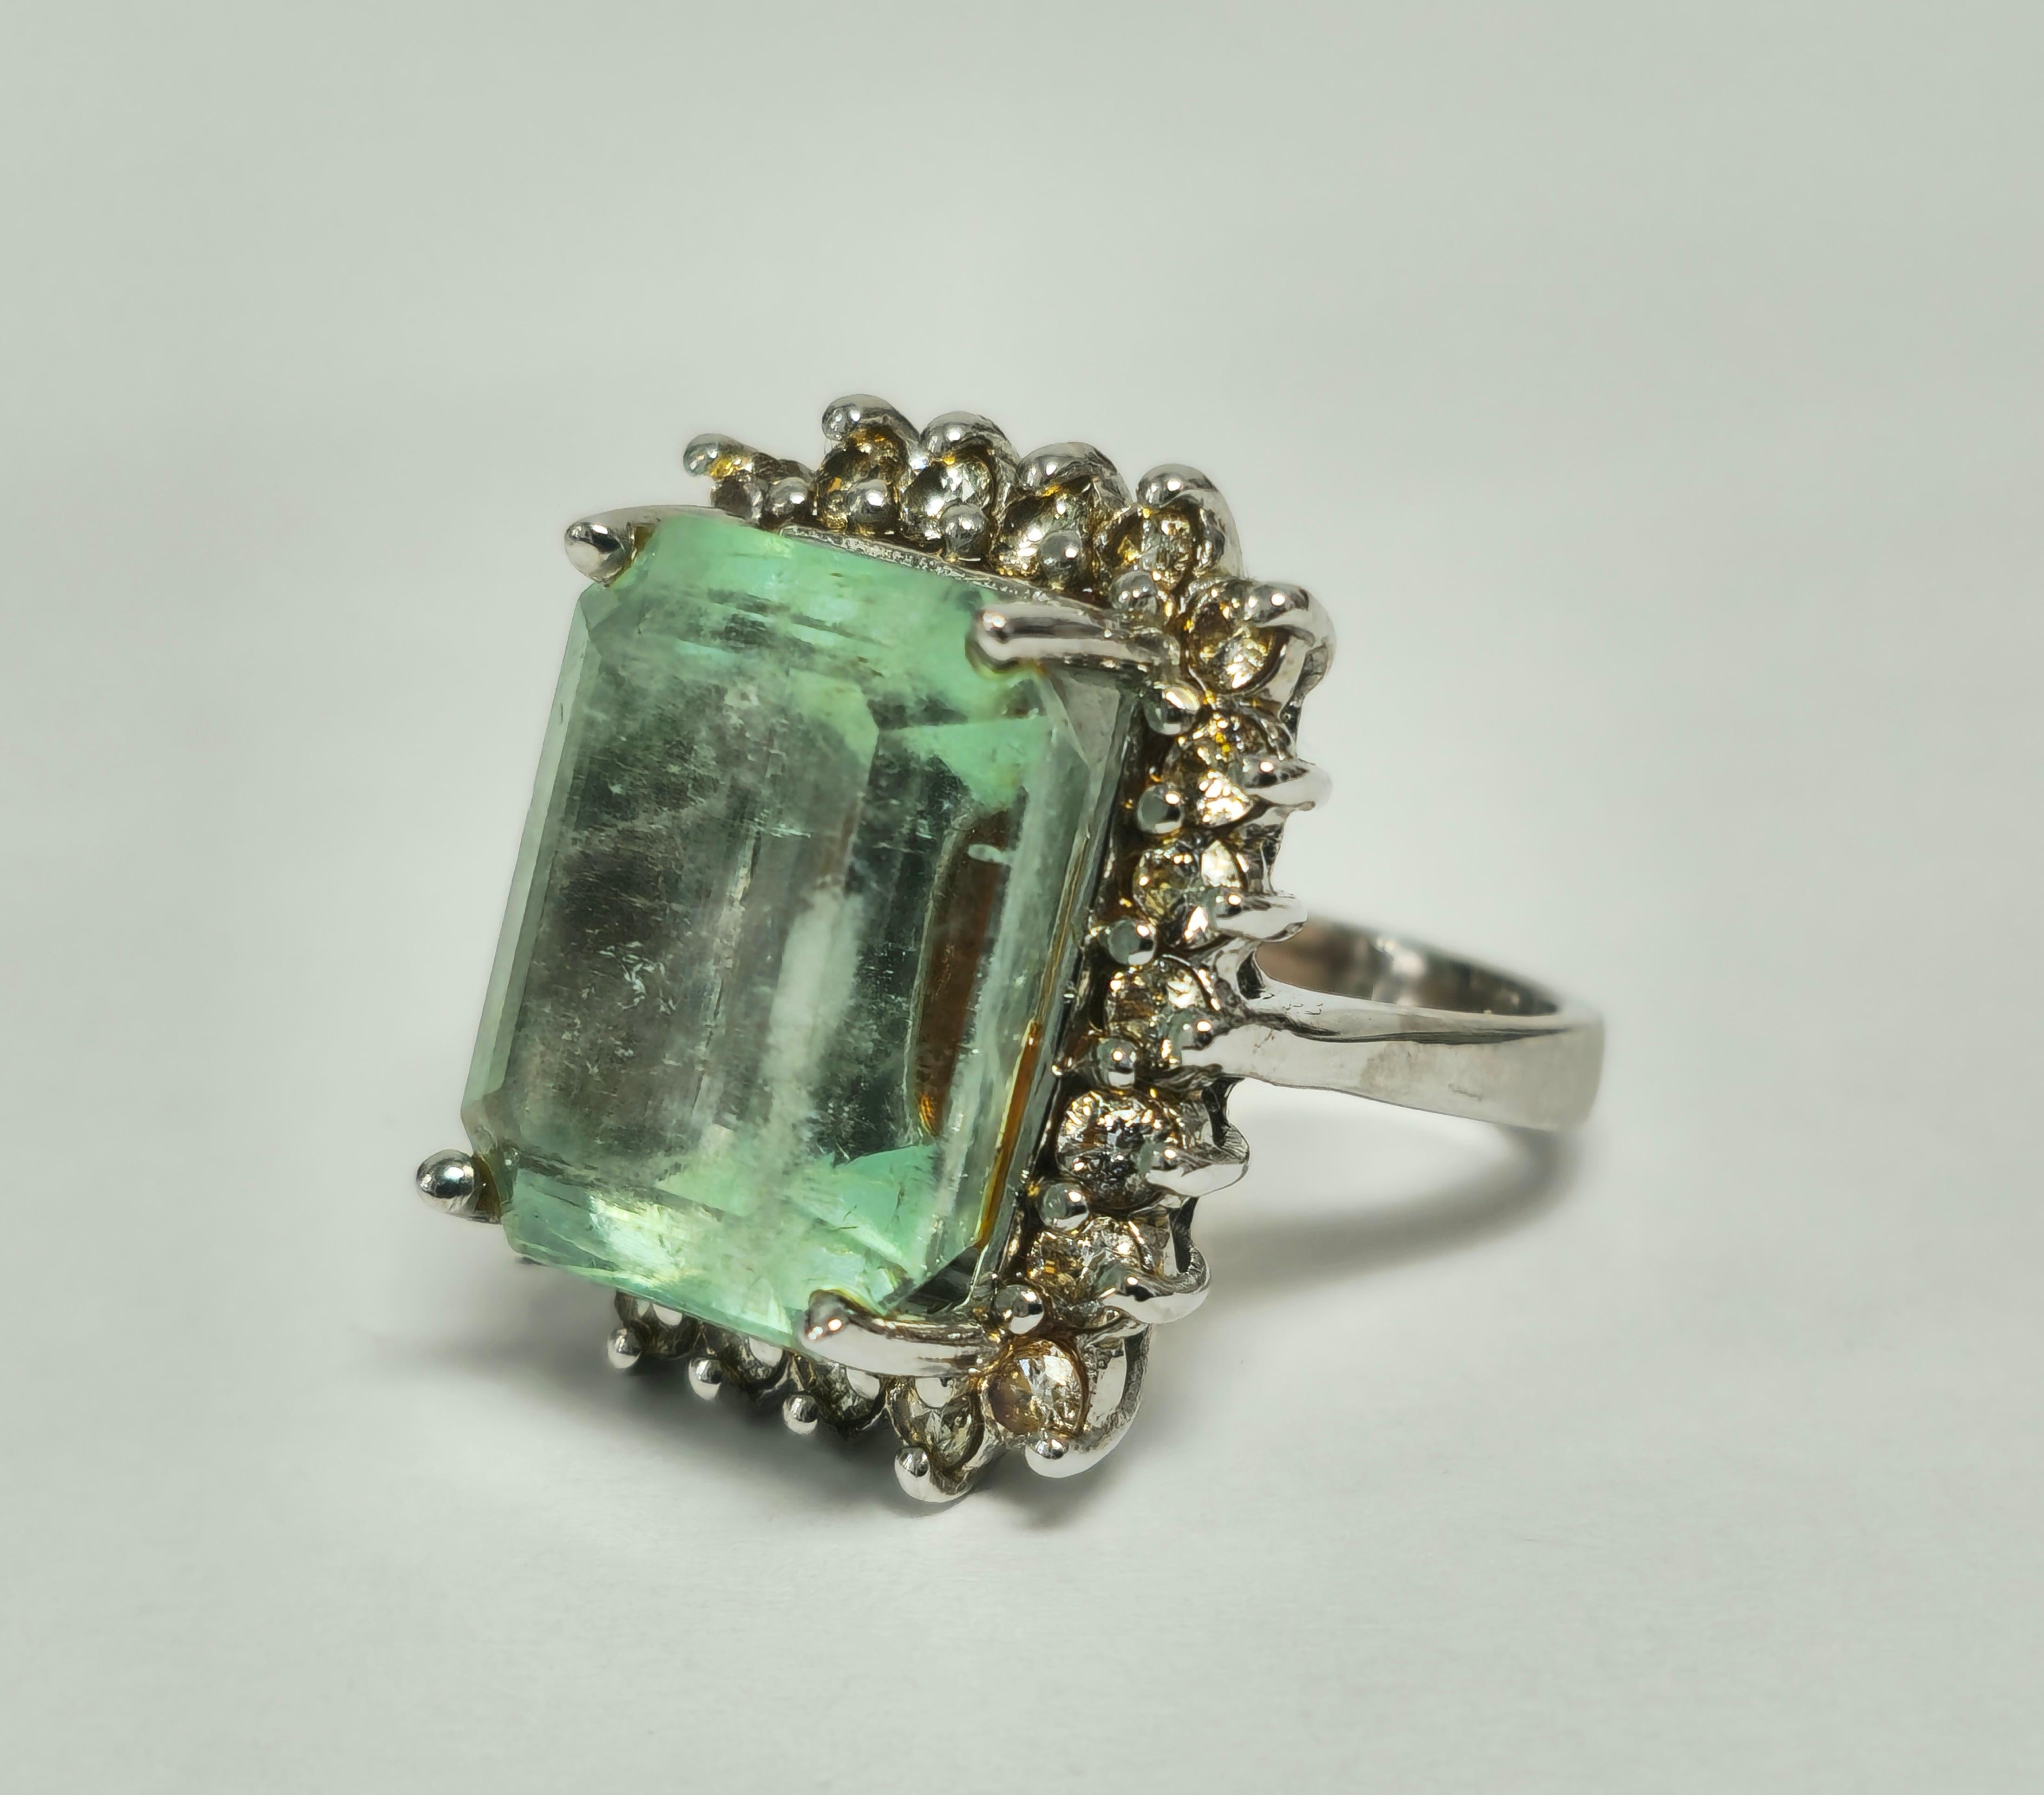 Elevate your style with our Ladies Contemporary Emerald Ring, boasting a breathtaking Colombian emerald set in lustrous white gold. Accented with dazzling round brilliant cut diamonds, this rare and one-of-a-kind piece exudes timeless elegance and